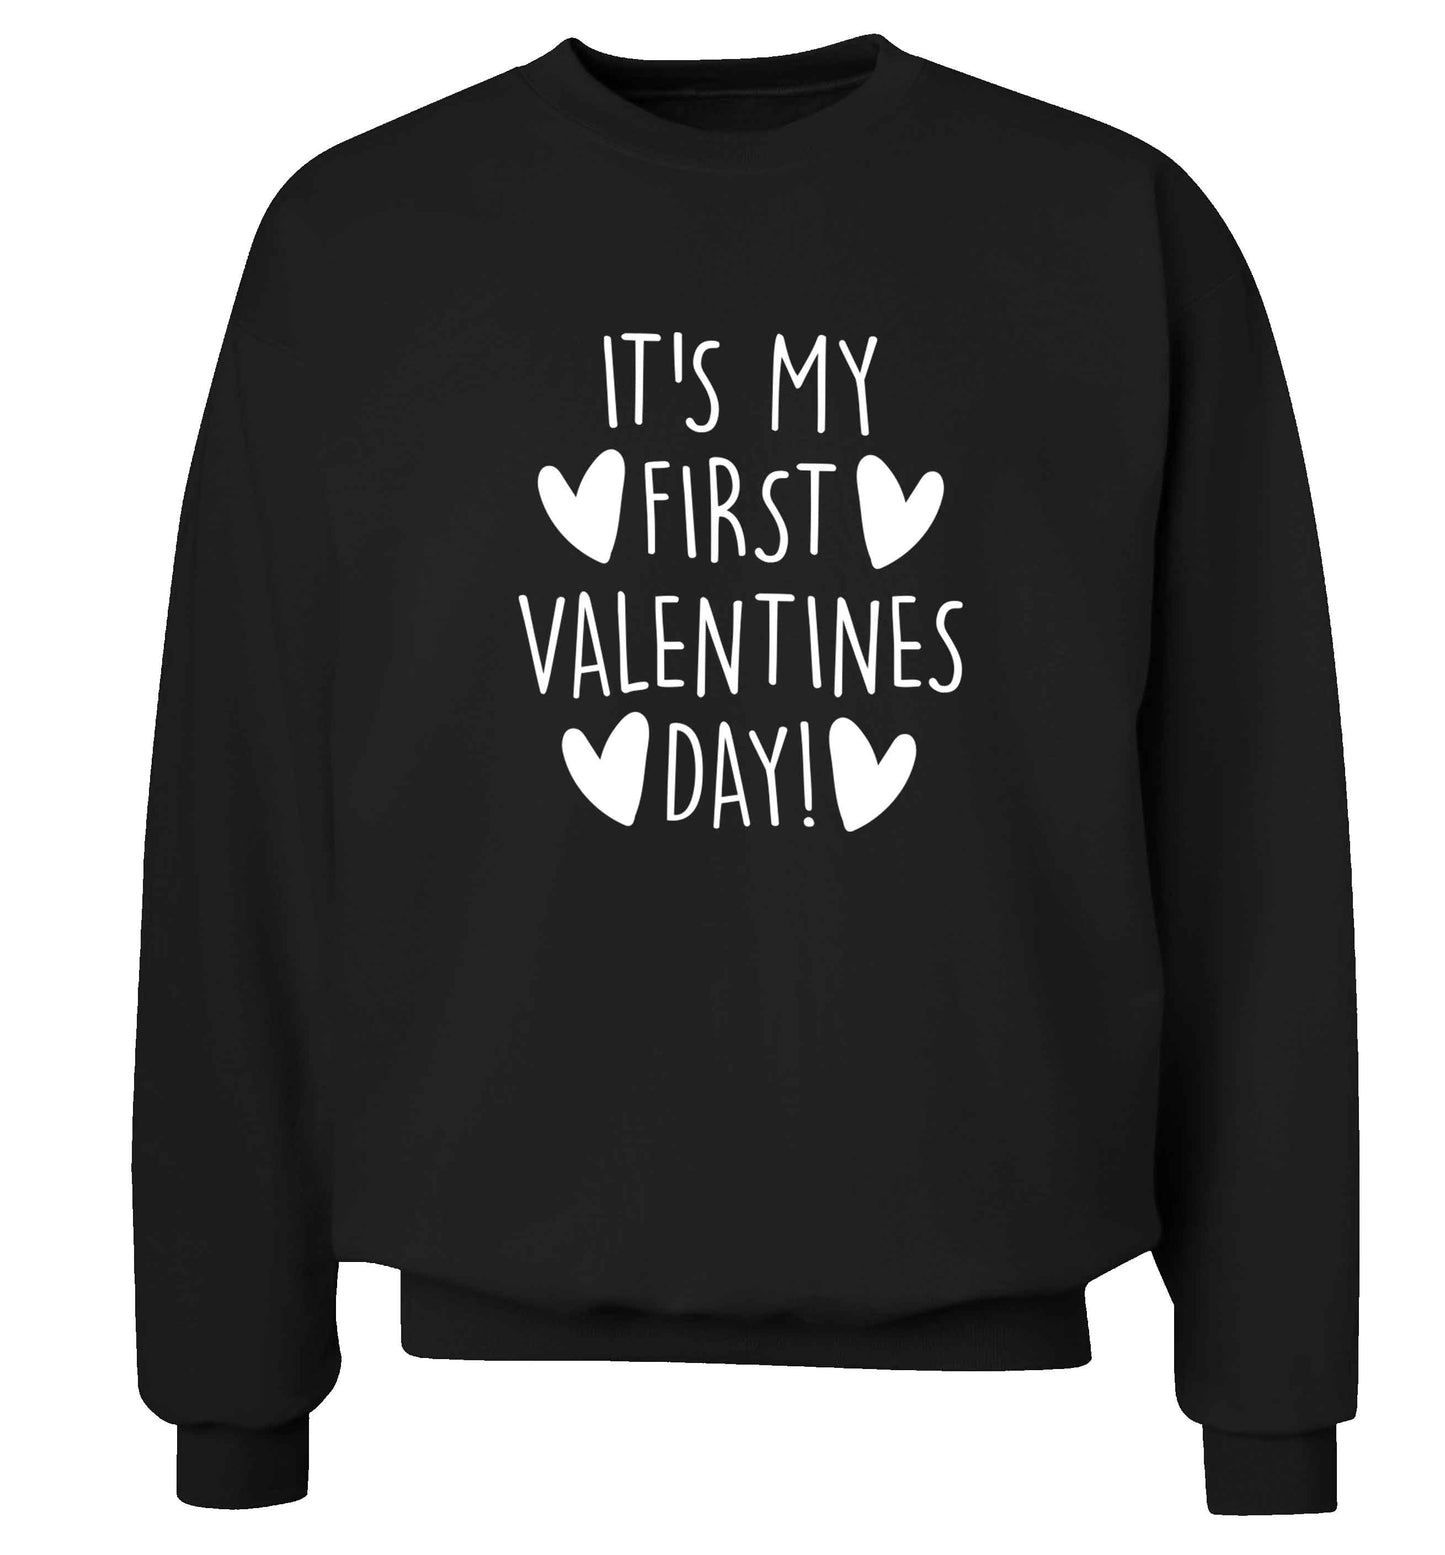 It's my first valentines day! adult's unisex black sweater 2XL